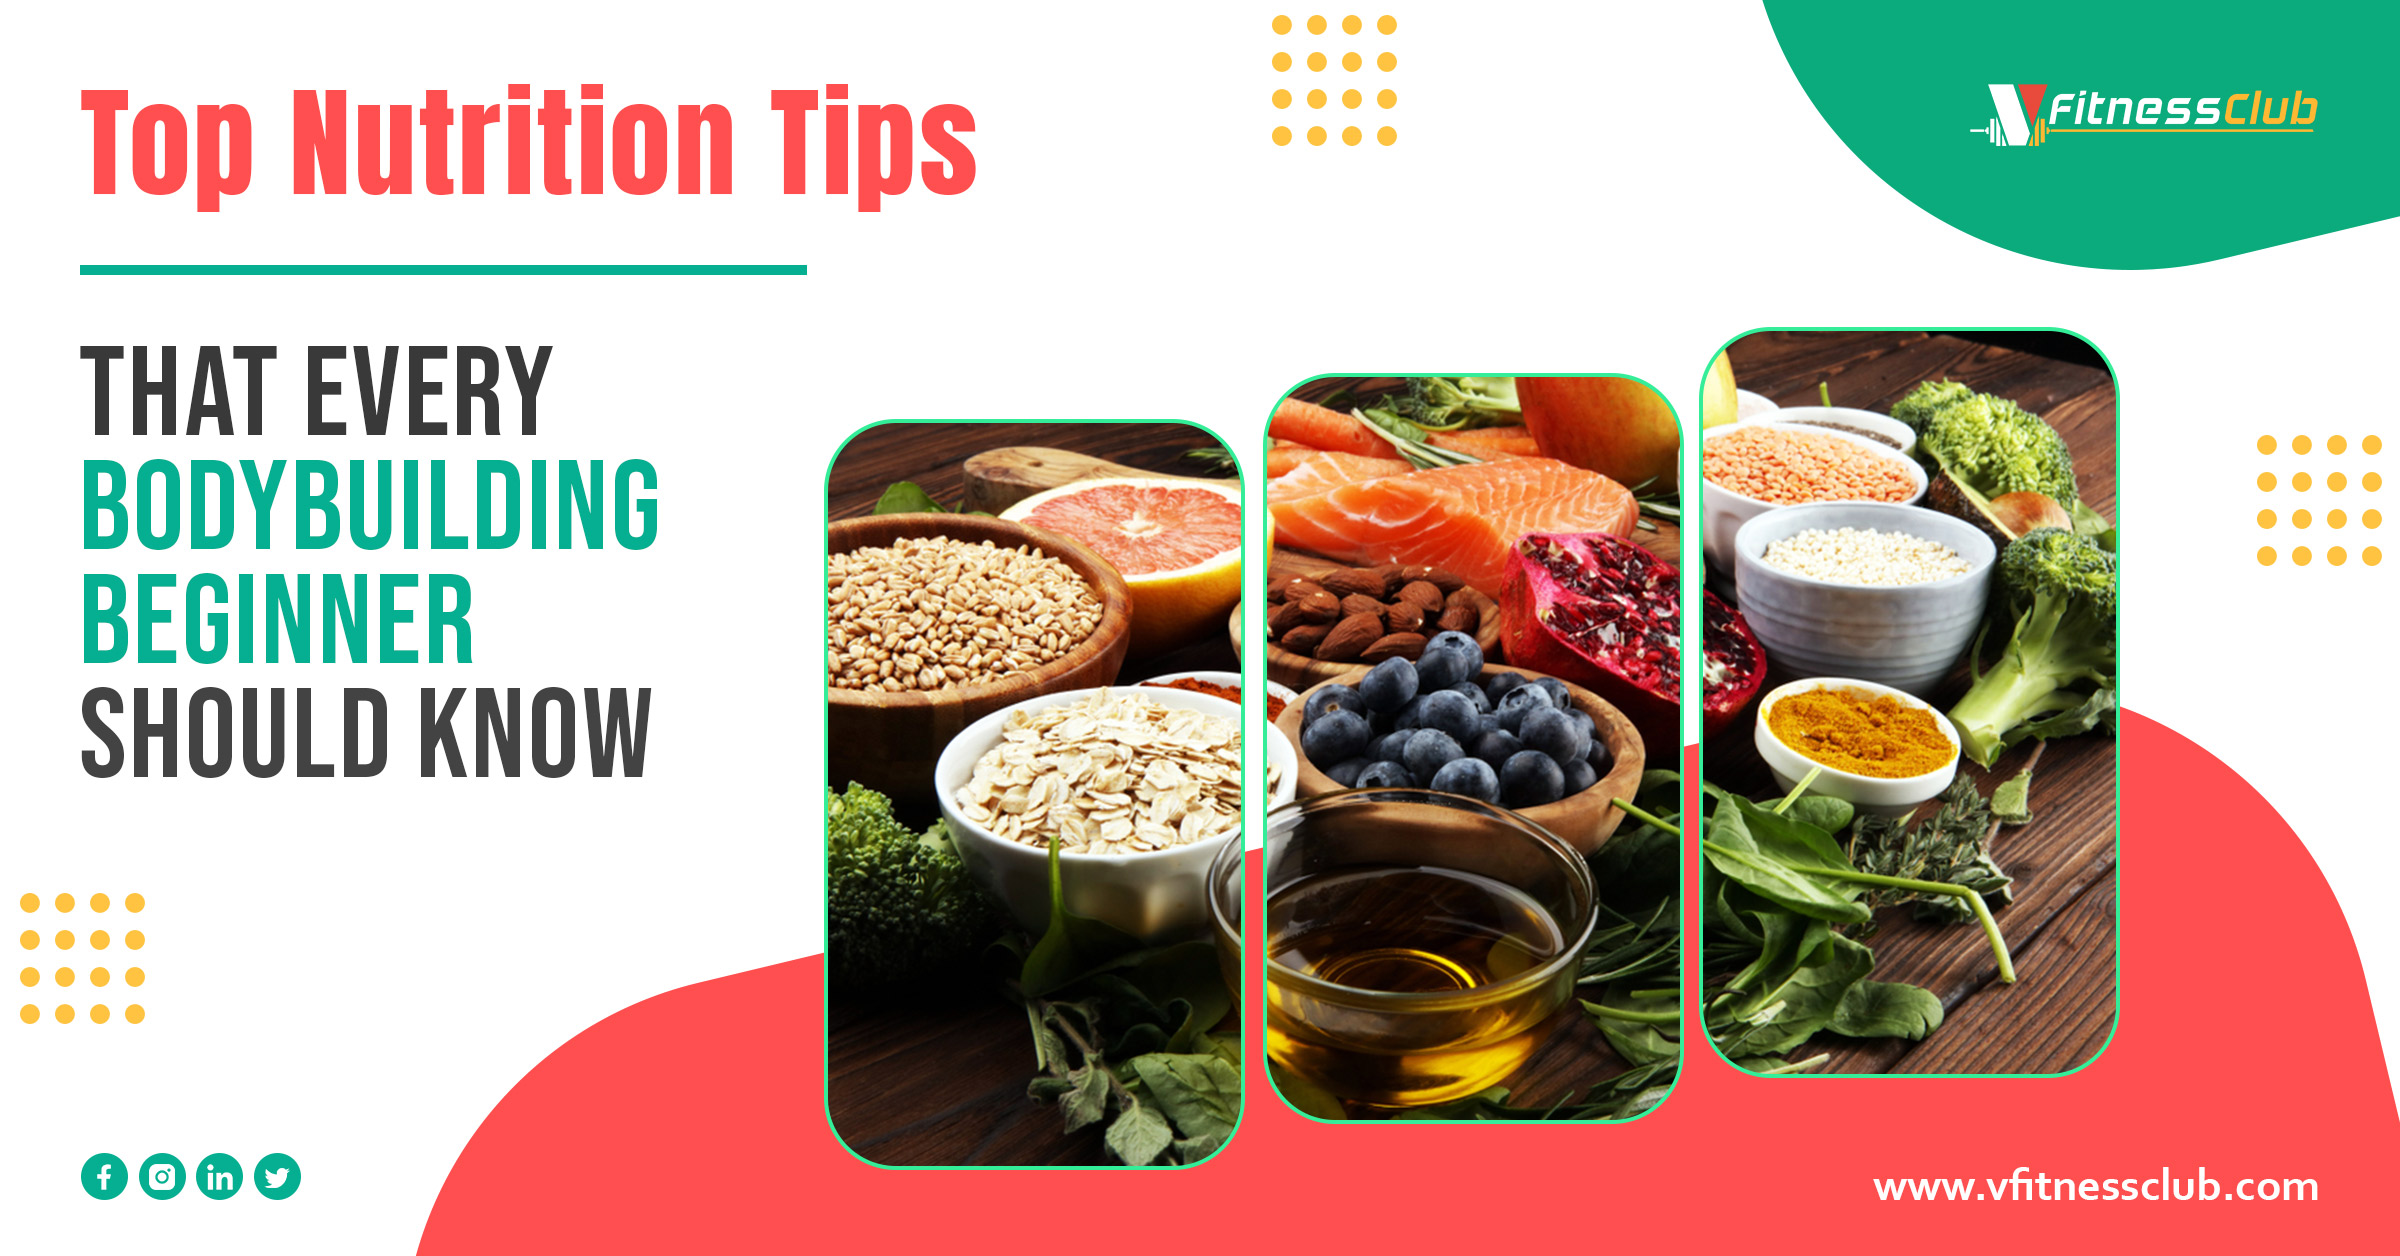 Top Nutrition Tips That Every Bodybuilding Beginner Should Know